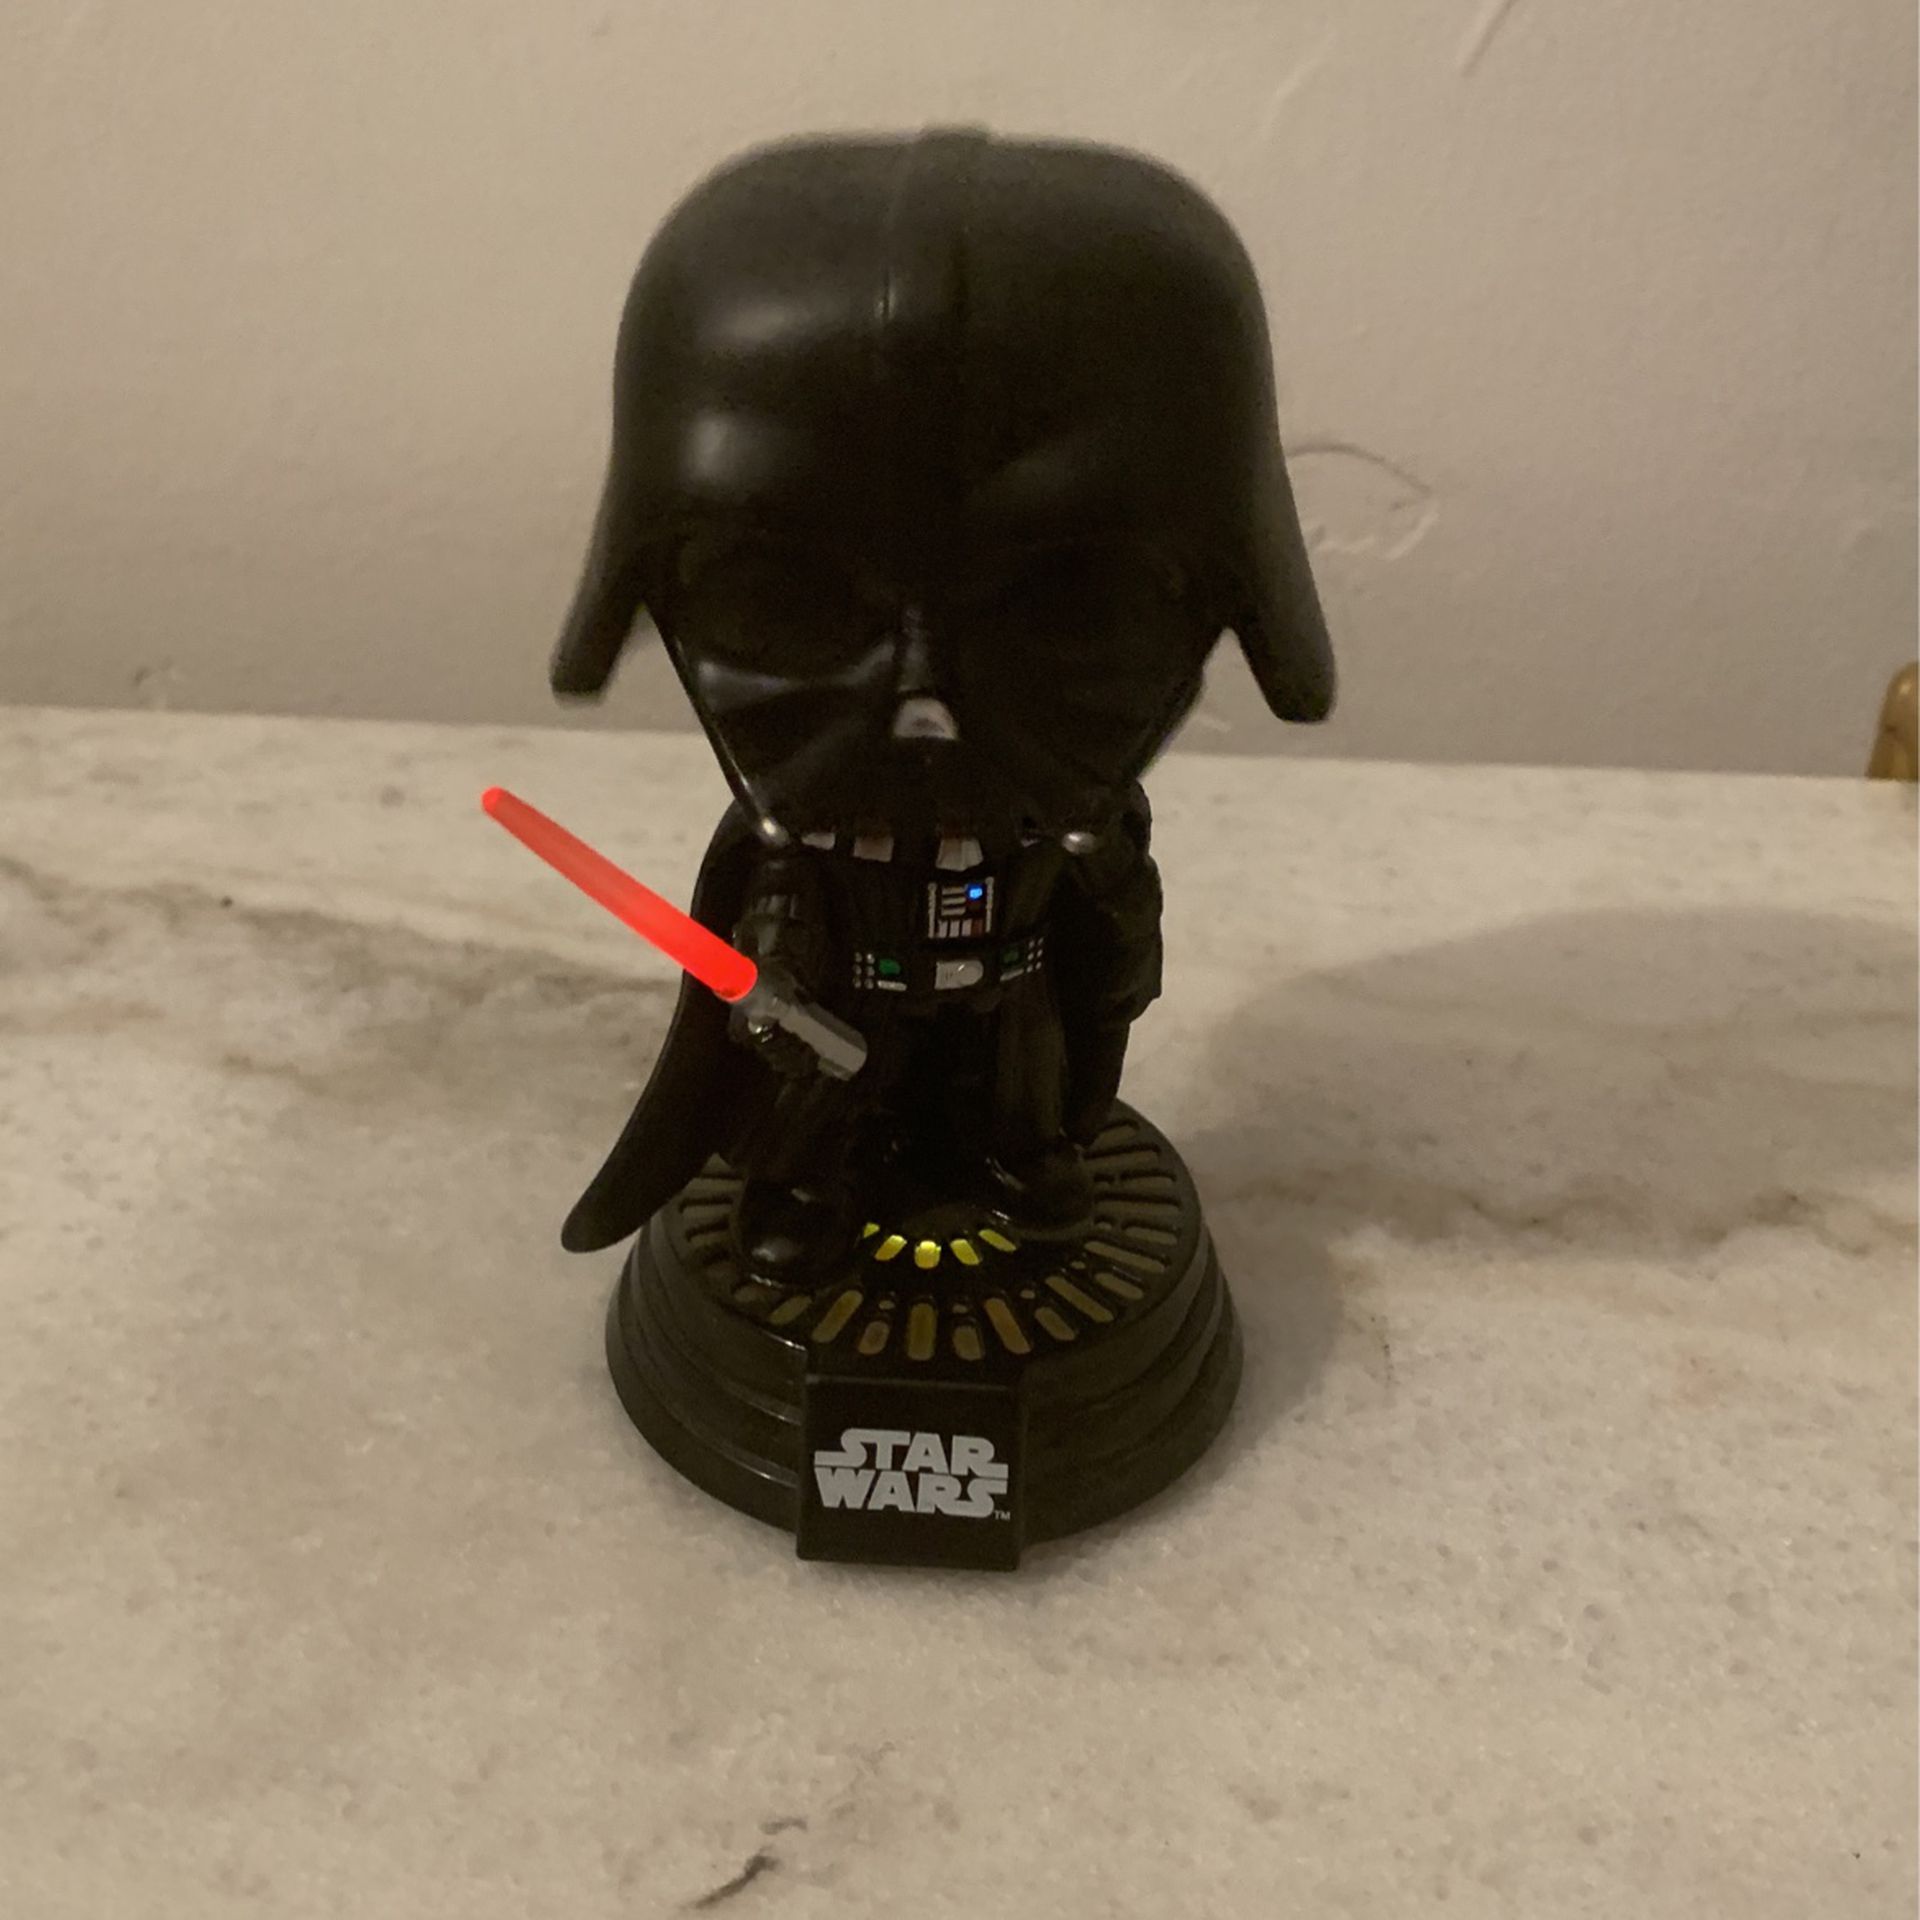 POP! JUMBO 10" LIGHTS AND SOUNDS DARTH VADER EXCLUSIVE 